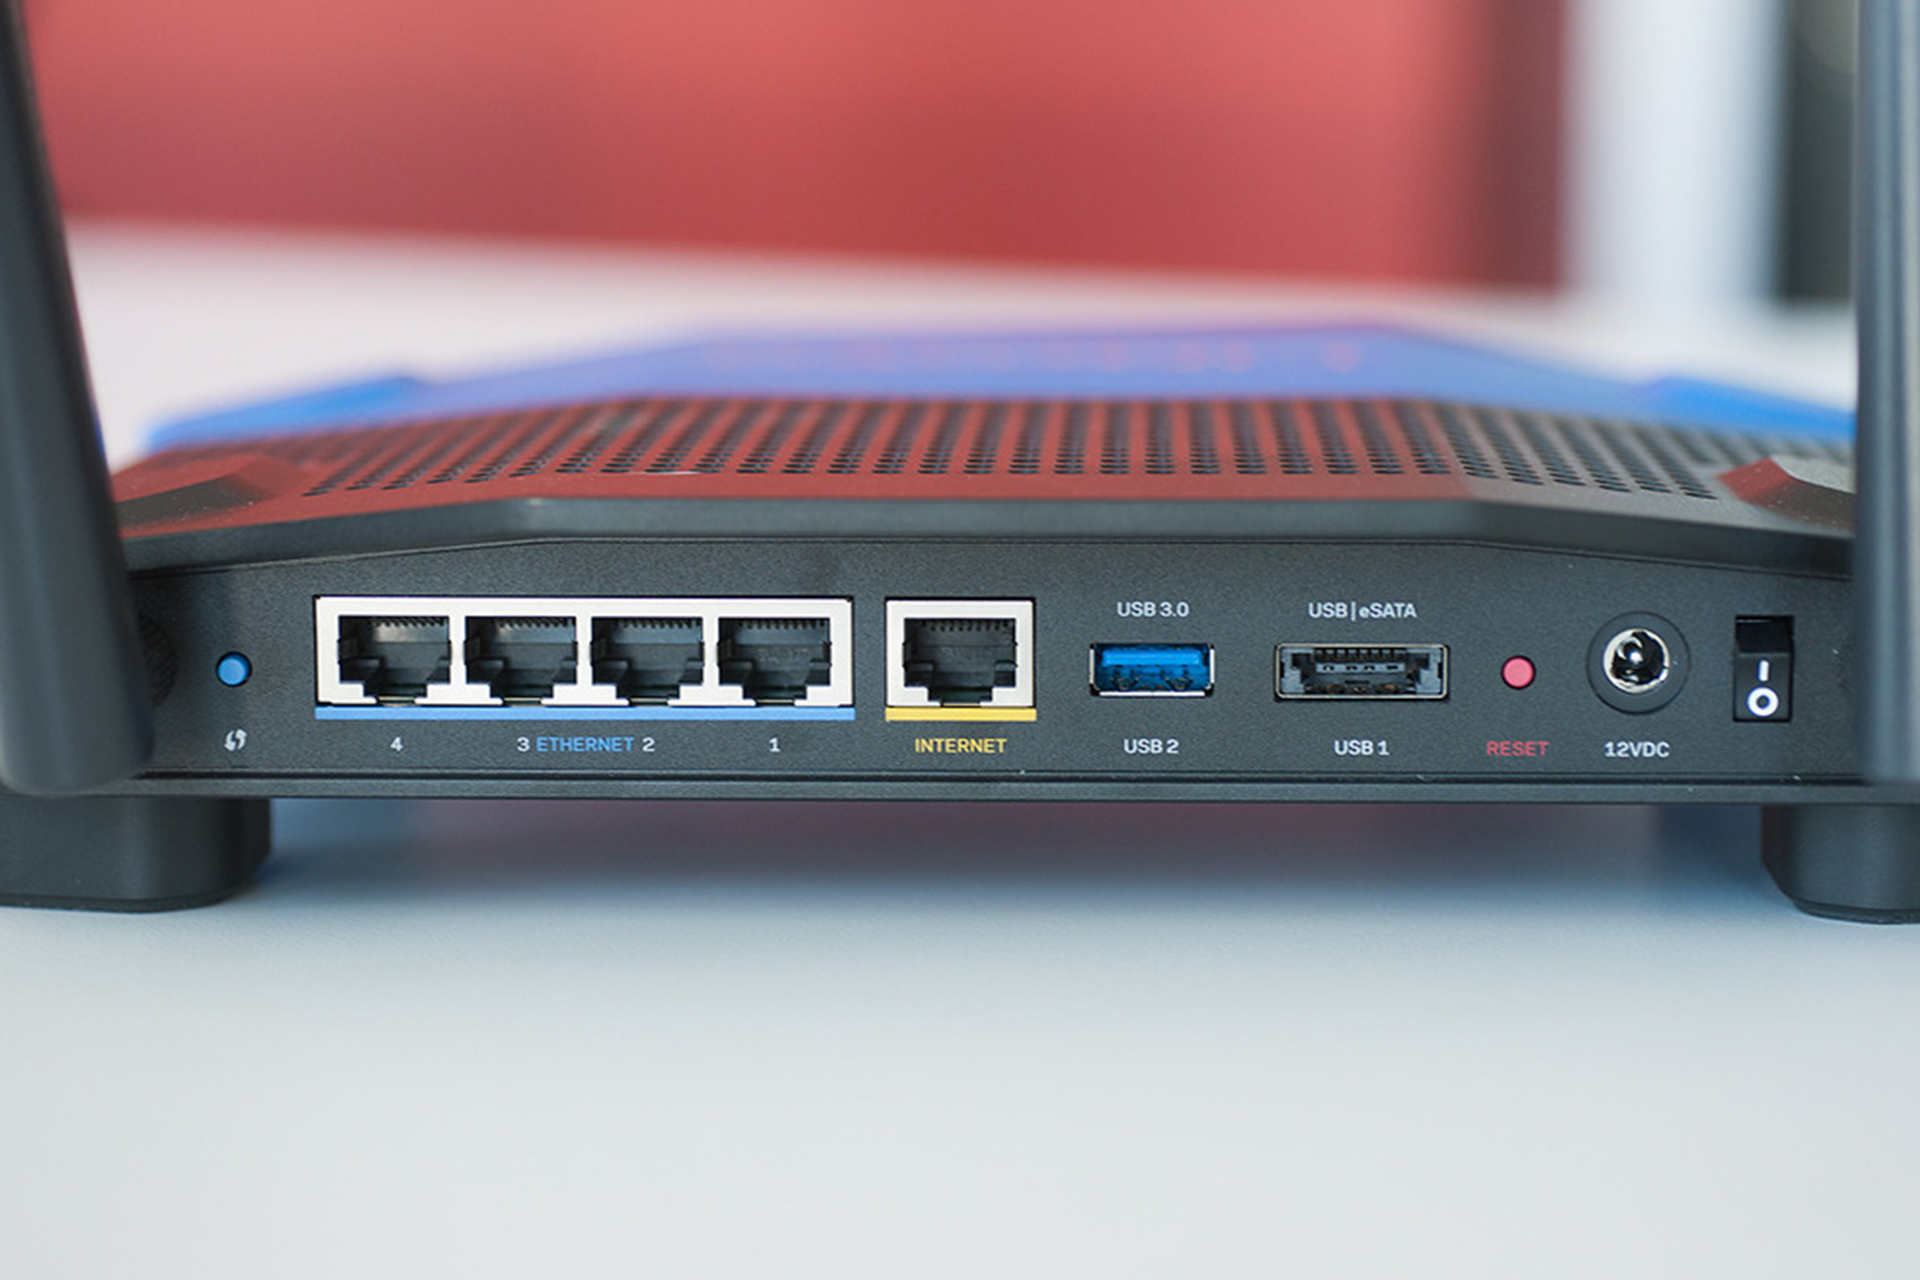 How to Connect Linksys wrt1900ac Router using WPS Button.